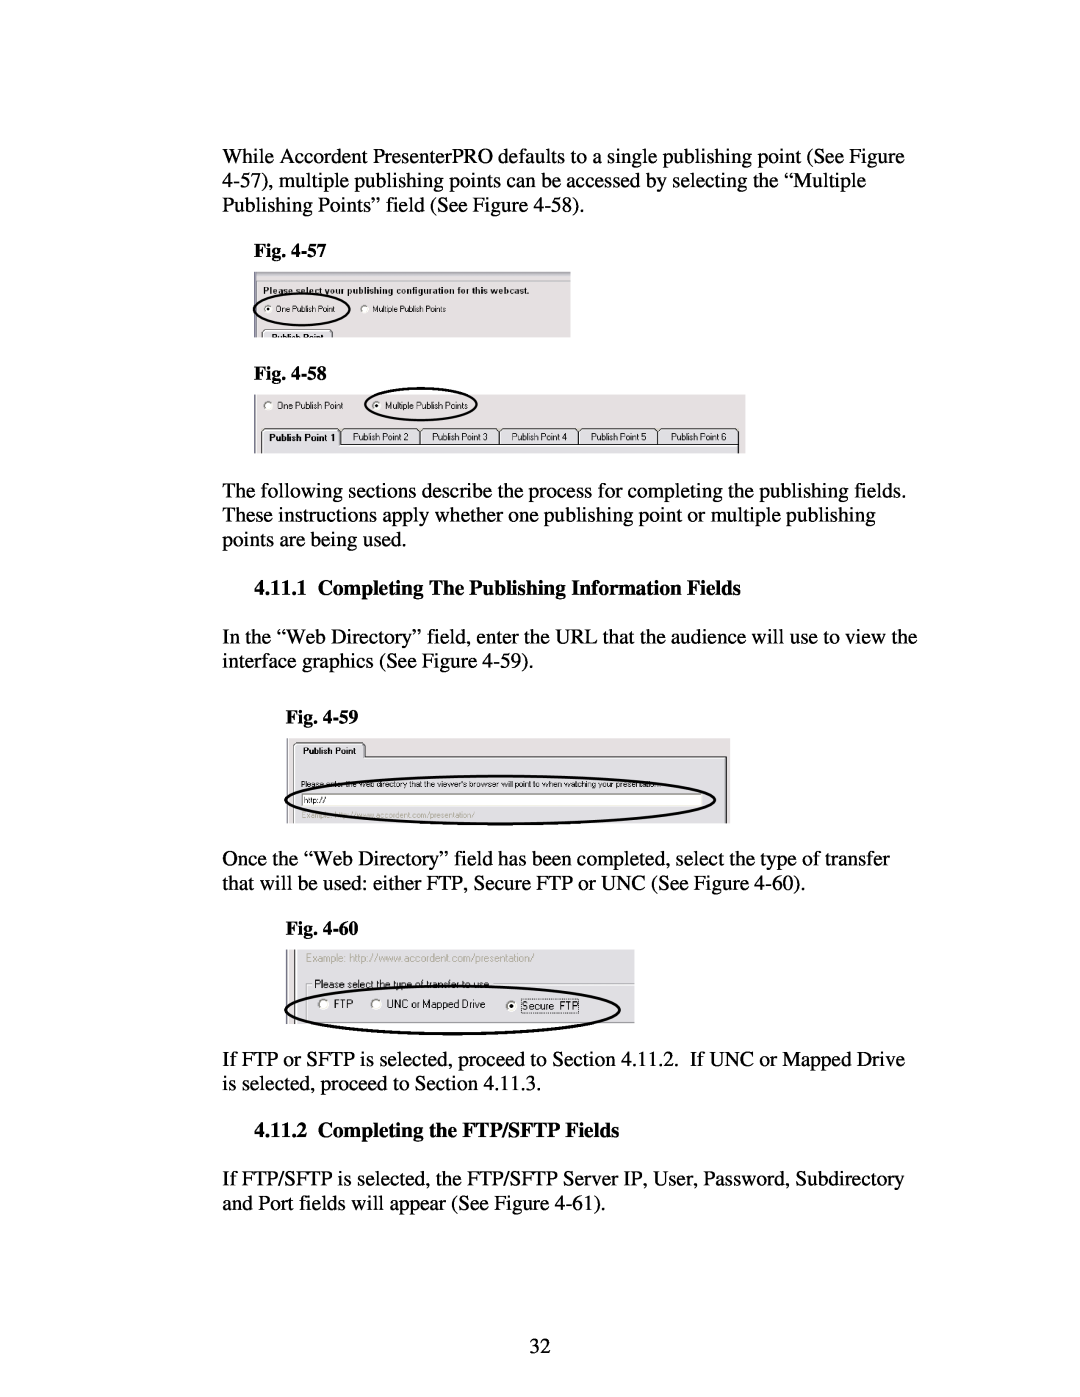 Polycom 6.1 user manual Completing The Publishing Information Fields, Completing the FTP/SFTP Fields 